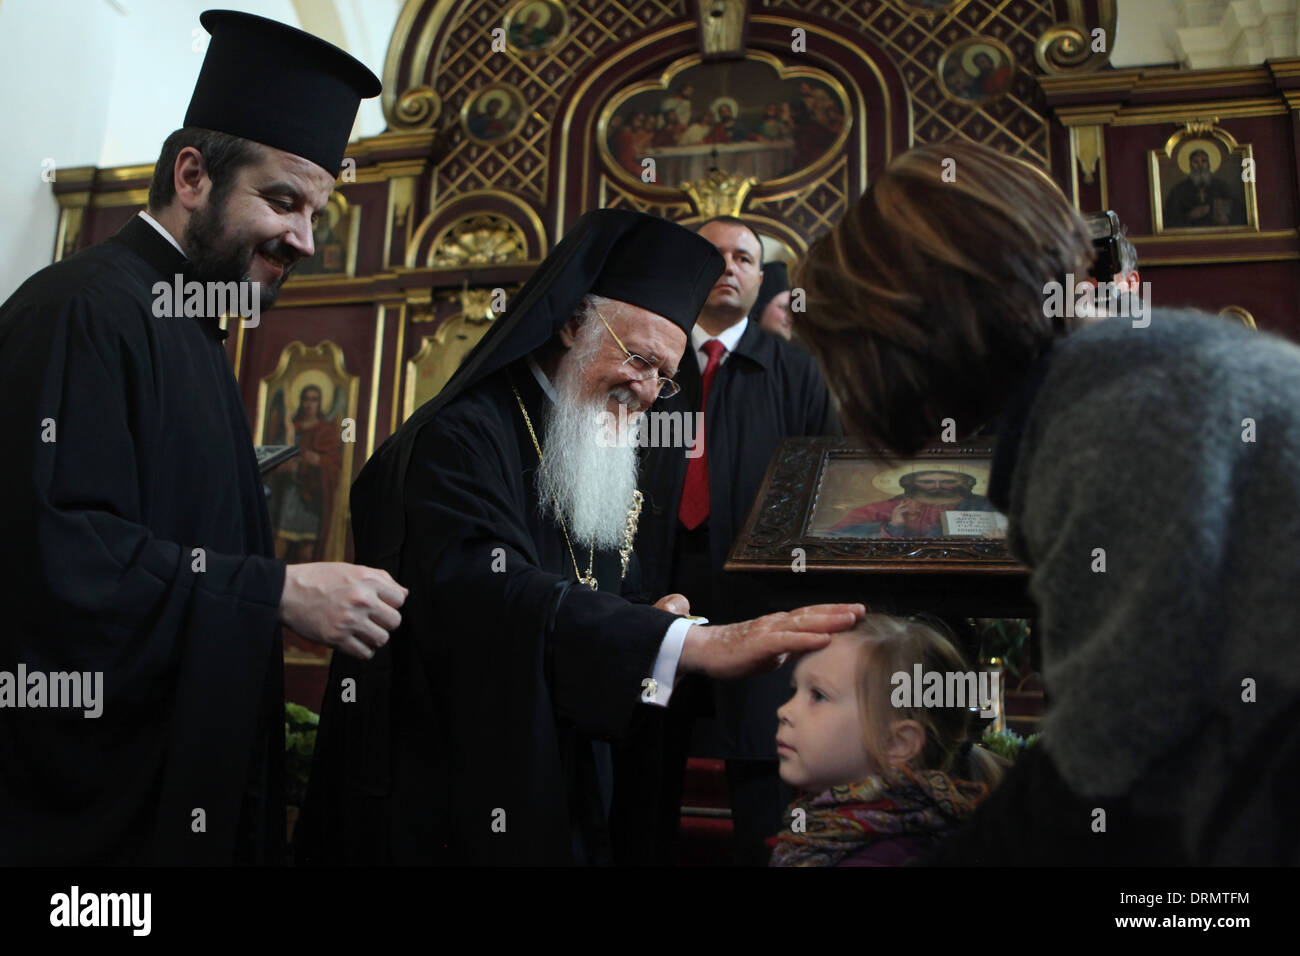 Patriarch Bartholomew I of Constantinople blesses to a young girl during his visit to Prague, Czech Republic. Stock Photo